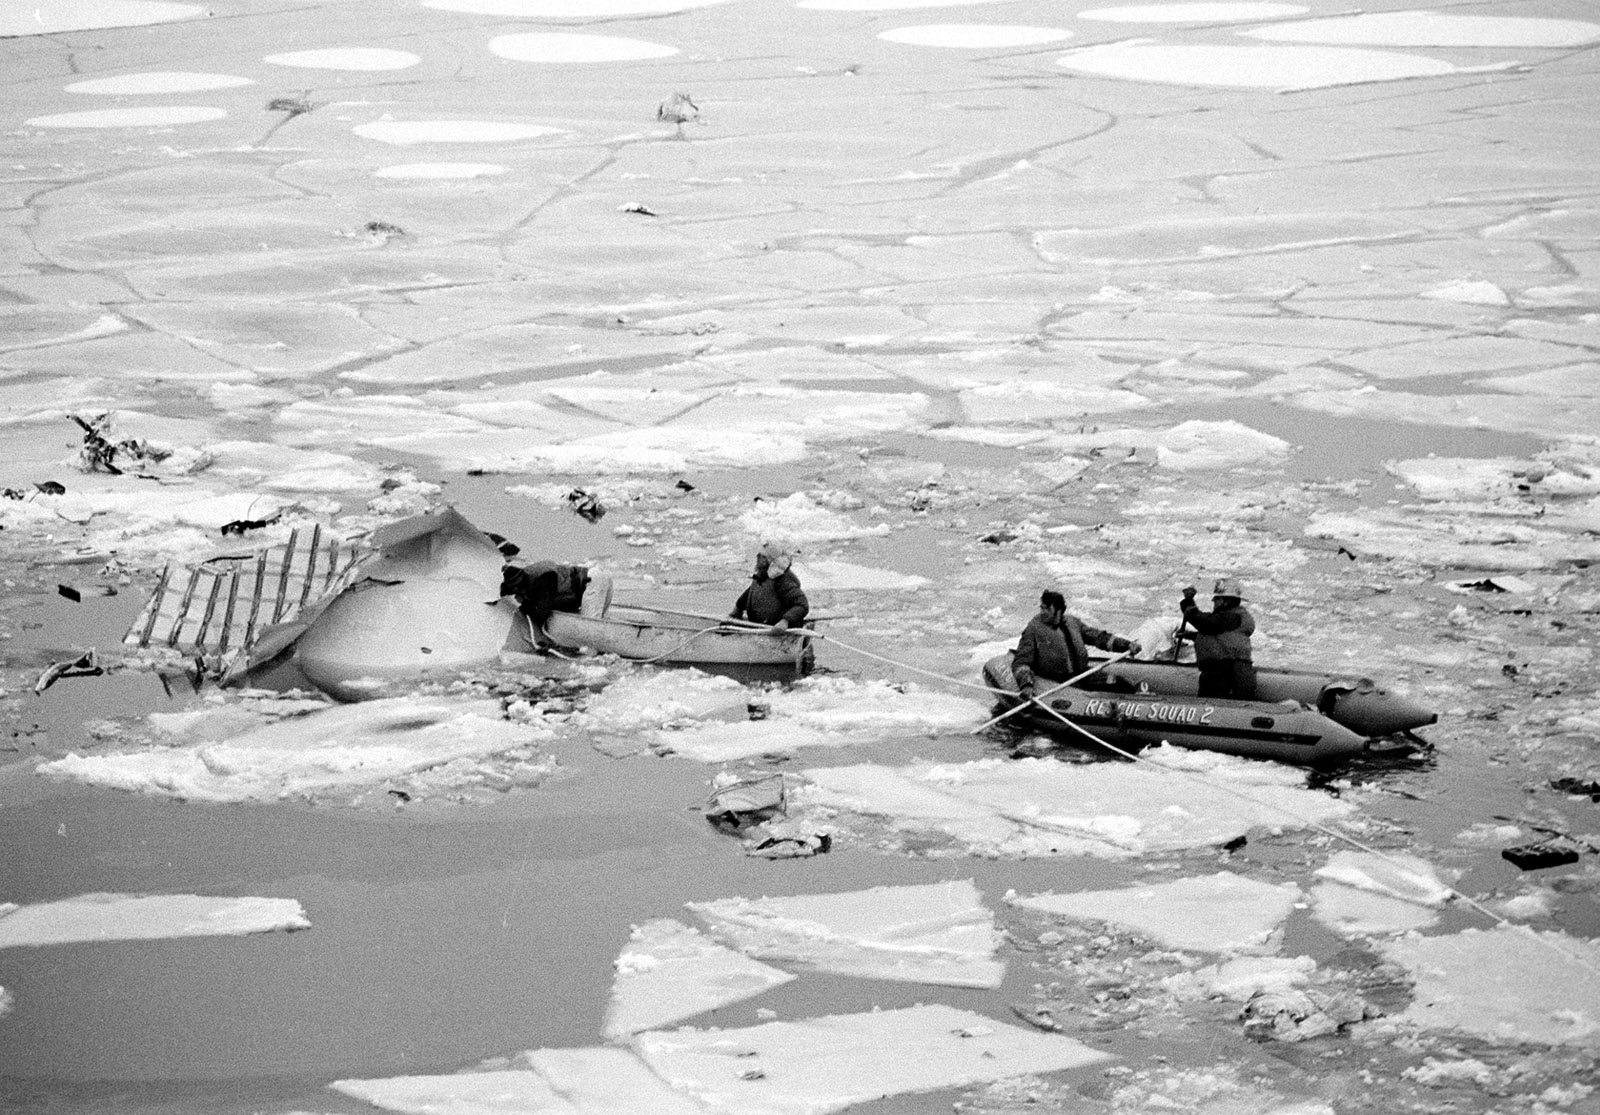 Wreckage and broken ice floats in the Potomac River in Washington, on January 13, 1982, shortly after an Air Florida jetliner hit the 14th Street bridge and crashed into the river. Rescue workers in rafts are searching for survivors. (AP Photo/Scott Stewart)